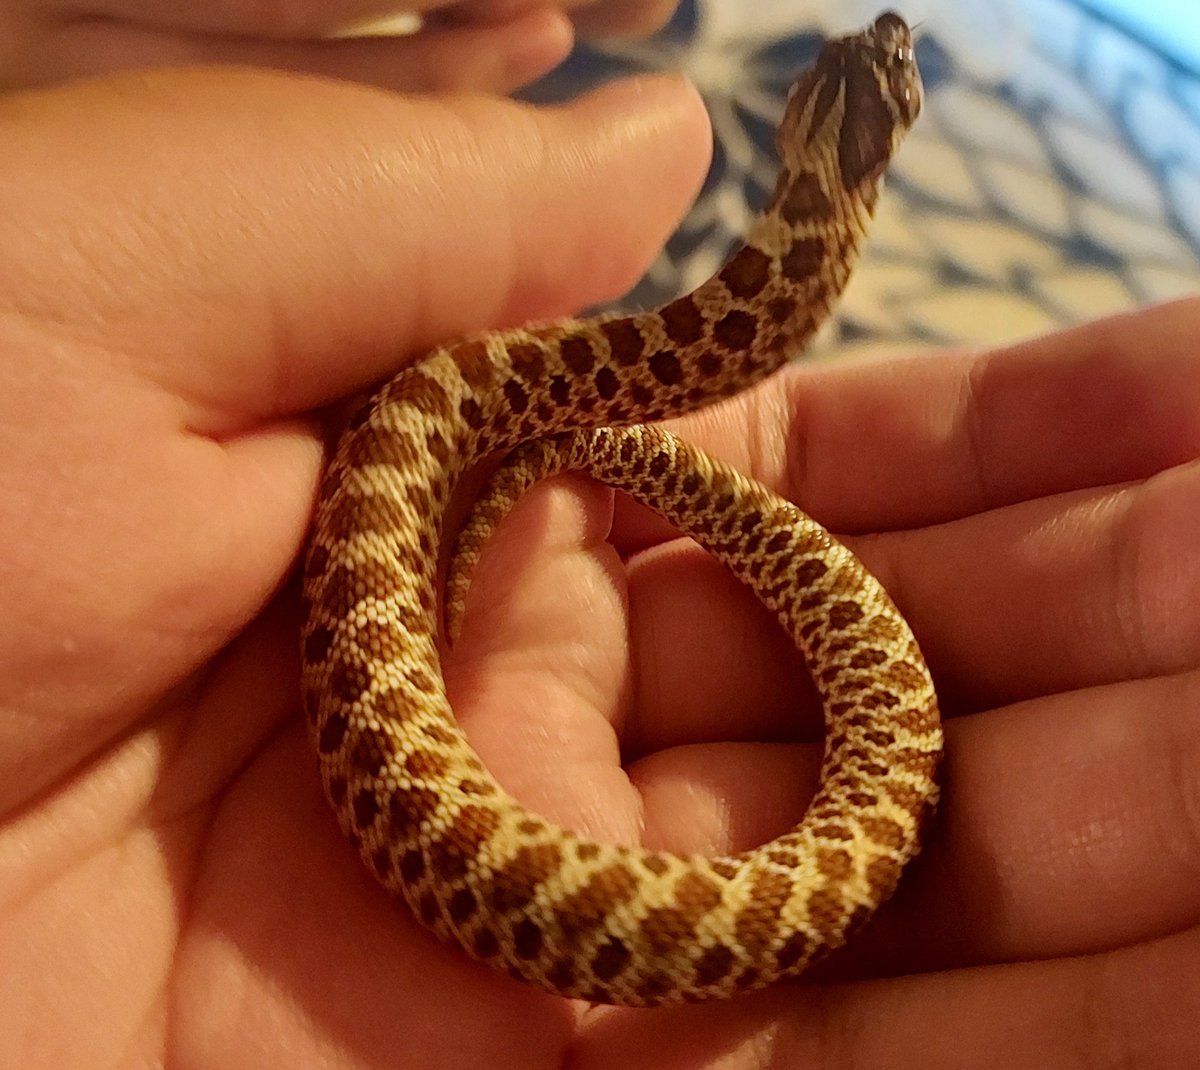 After a long while i finally got myself a hognose snake!
I named her muffins
She's very defensive so I'll leave her alone for a week then feed her a frozen thawed pinkie
I've been wanting this kinda snake for a while now and finally saw them on @XYZReptiles for sale! No regrets